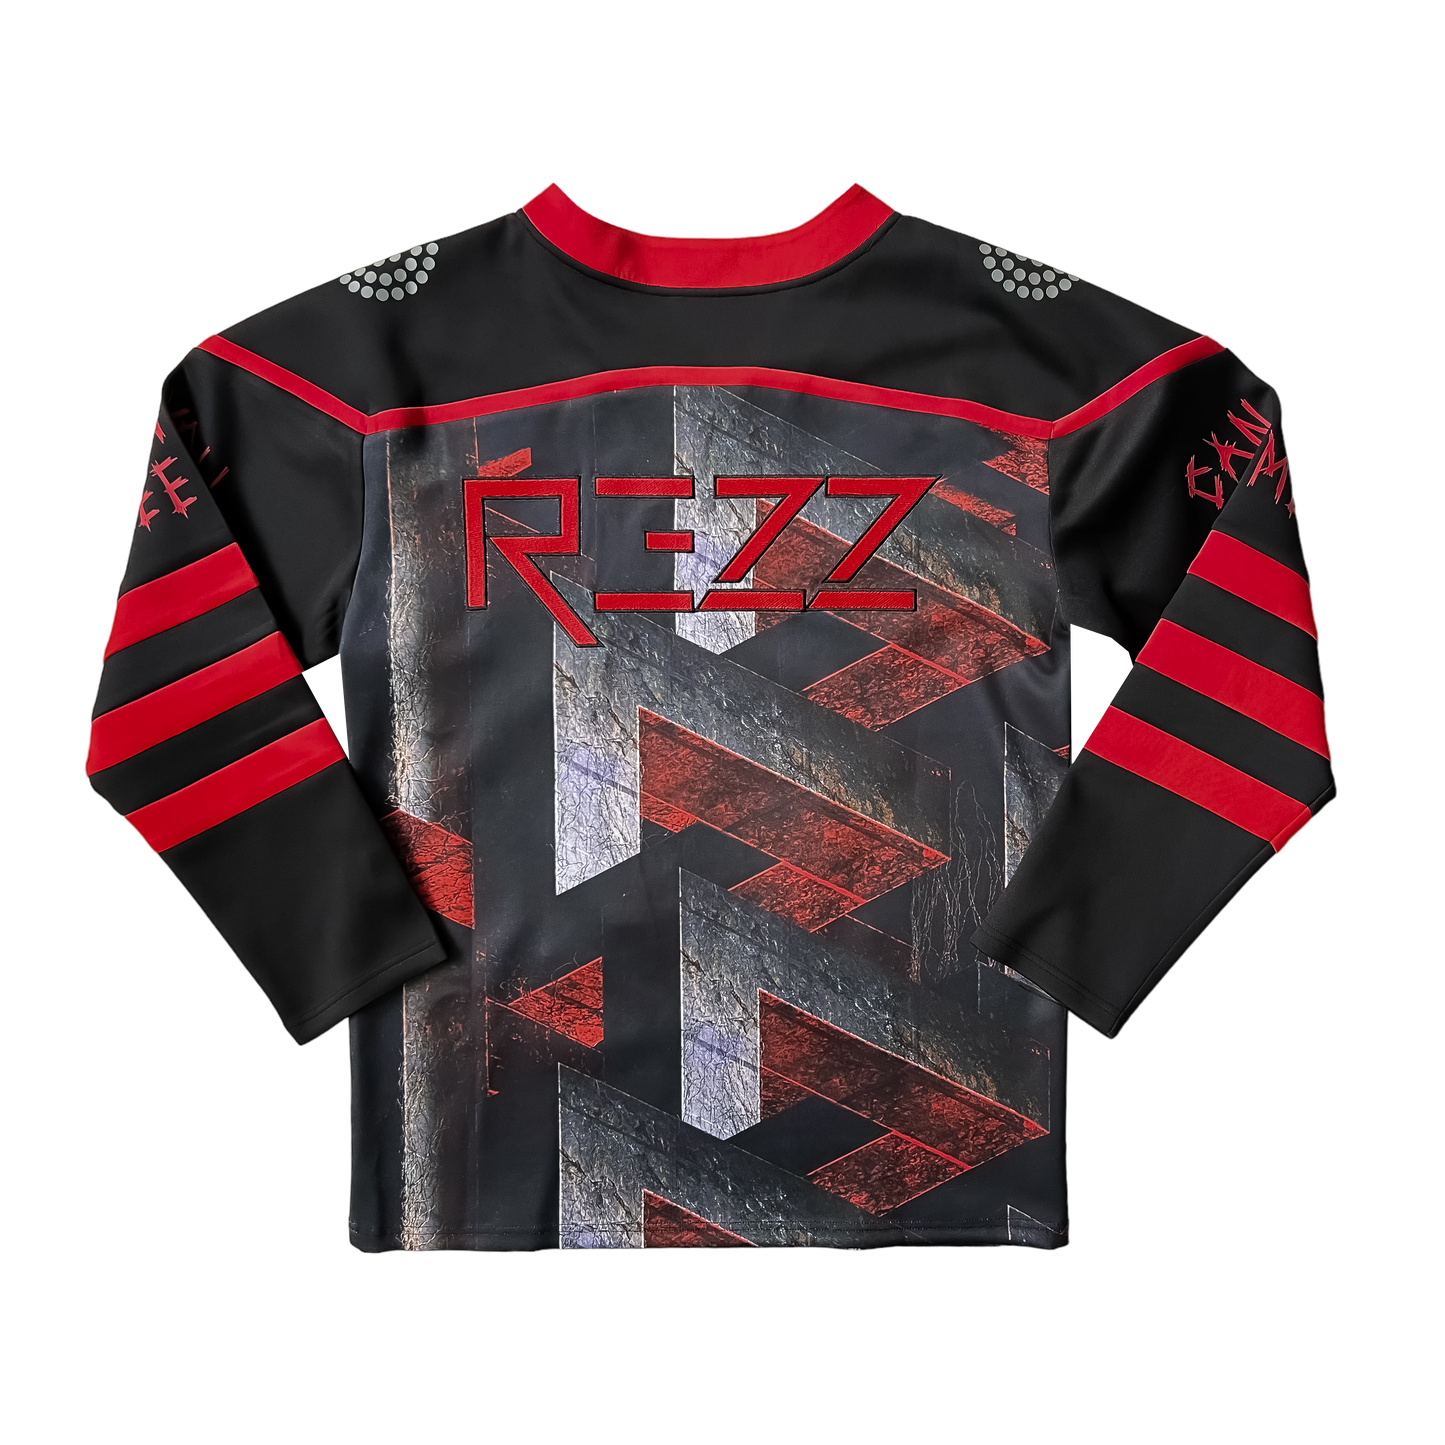 PRE SALE - REZZ - Can You See Me - Breakaway Fit Hockey Jersey